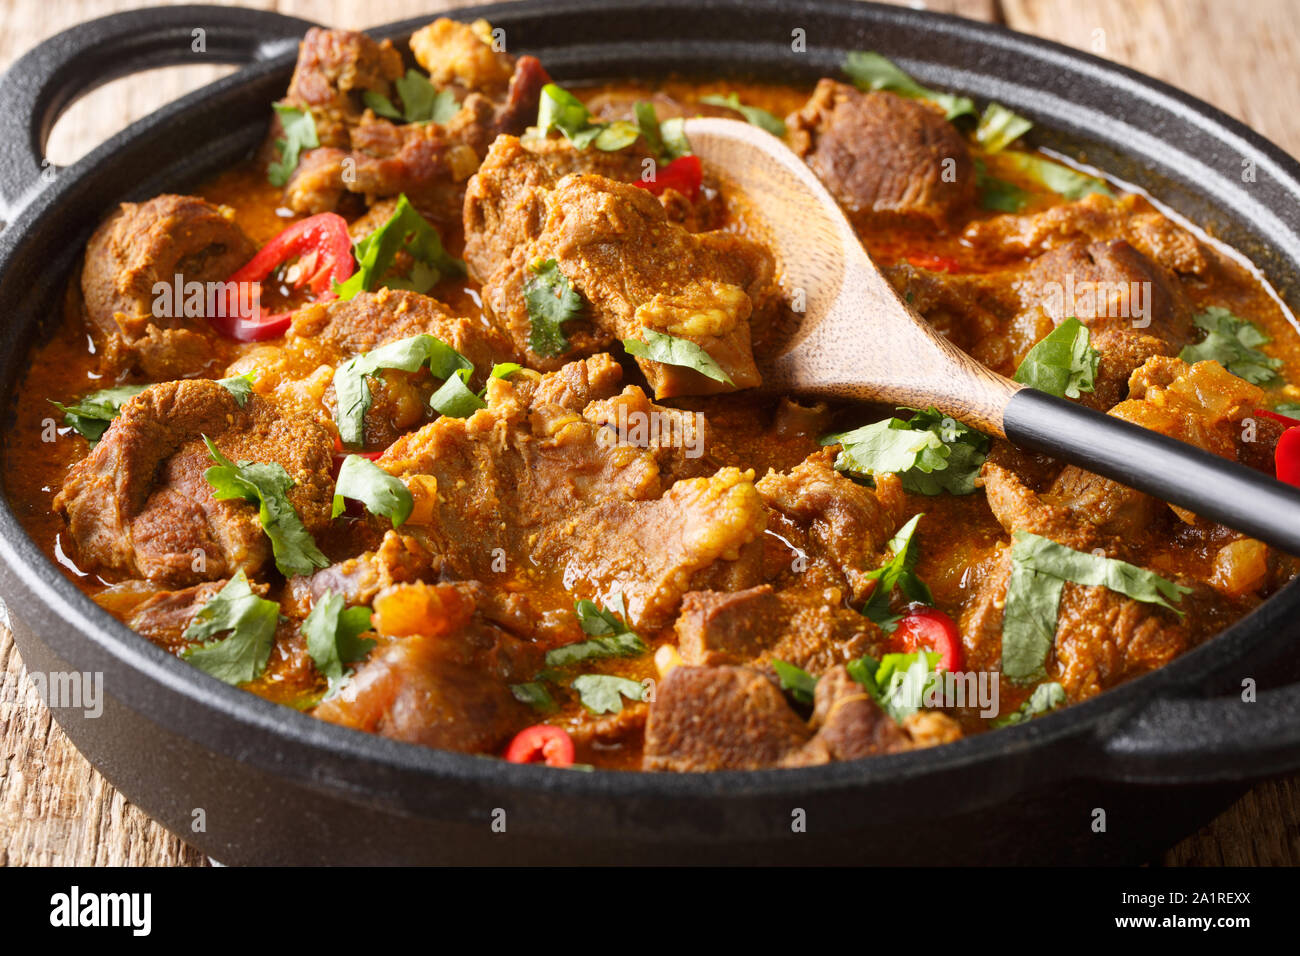 Indian traditional food Lamb rogan josh close-up in a pan on the table. horizontal Stock Photo